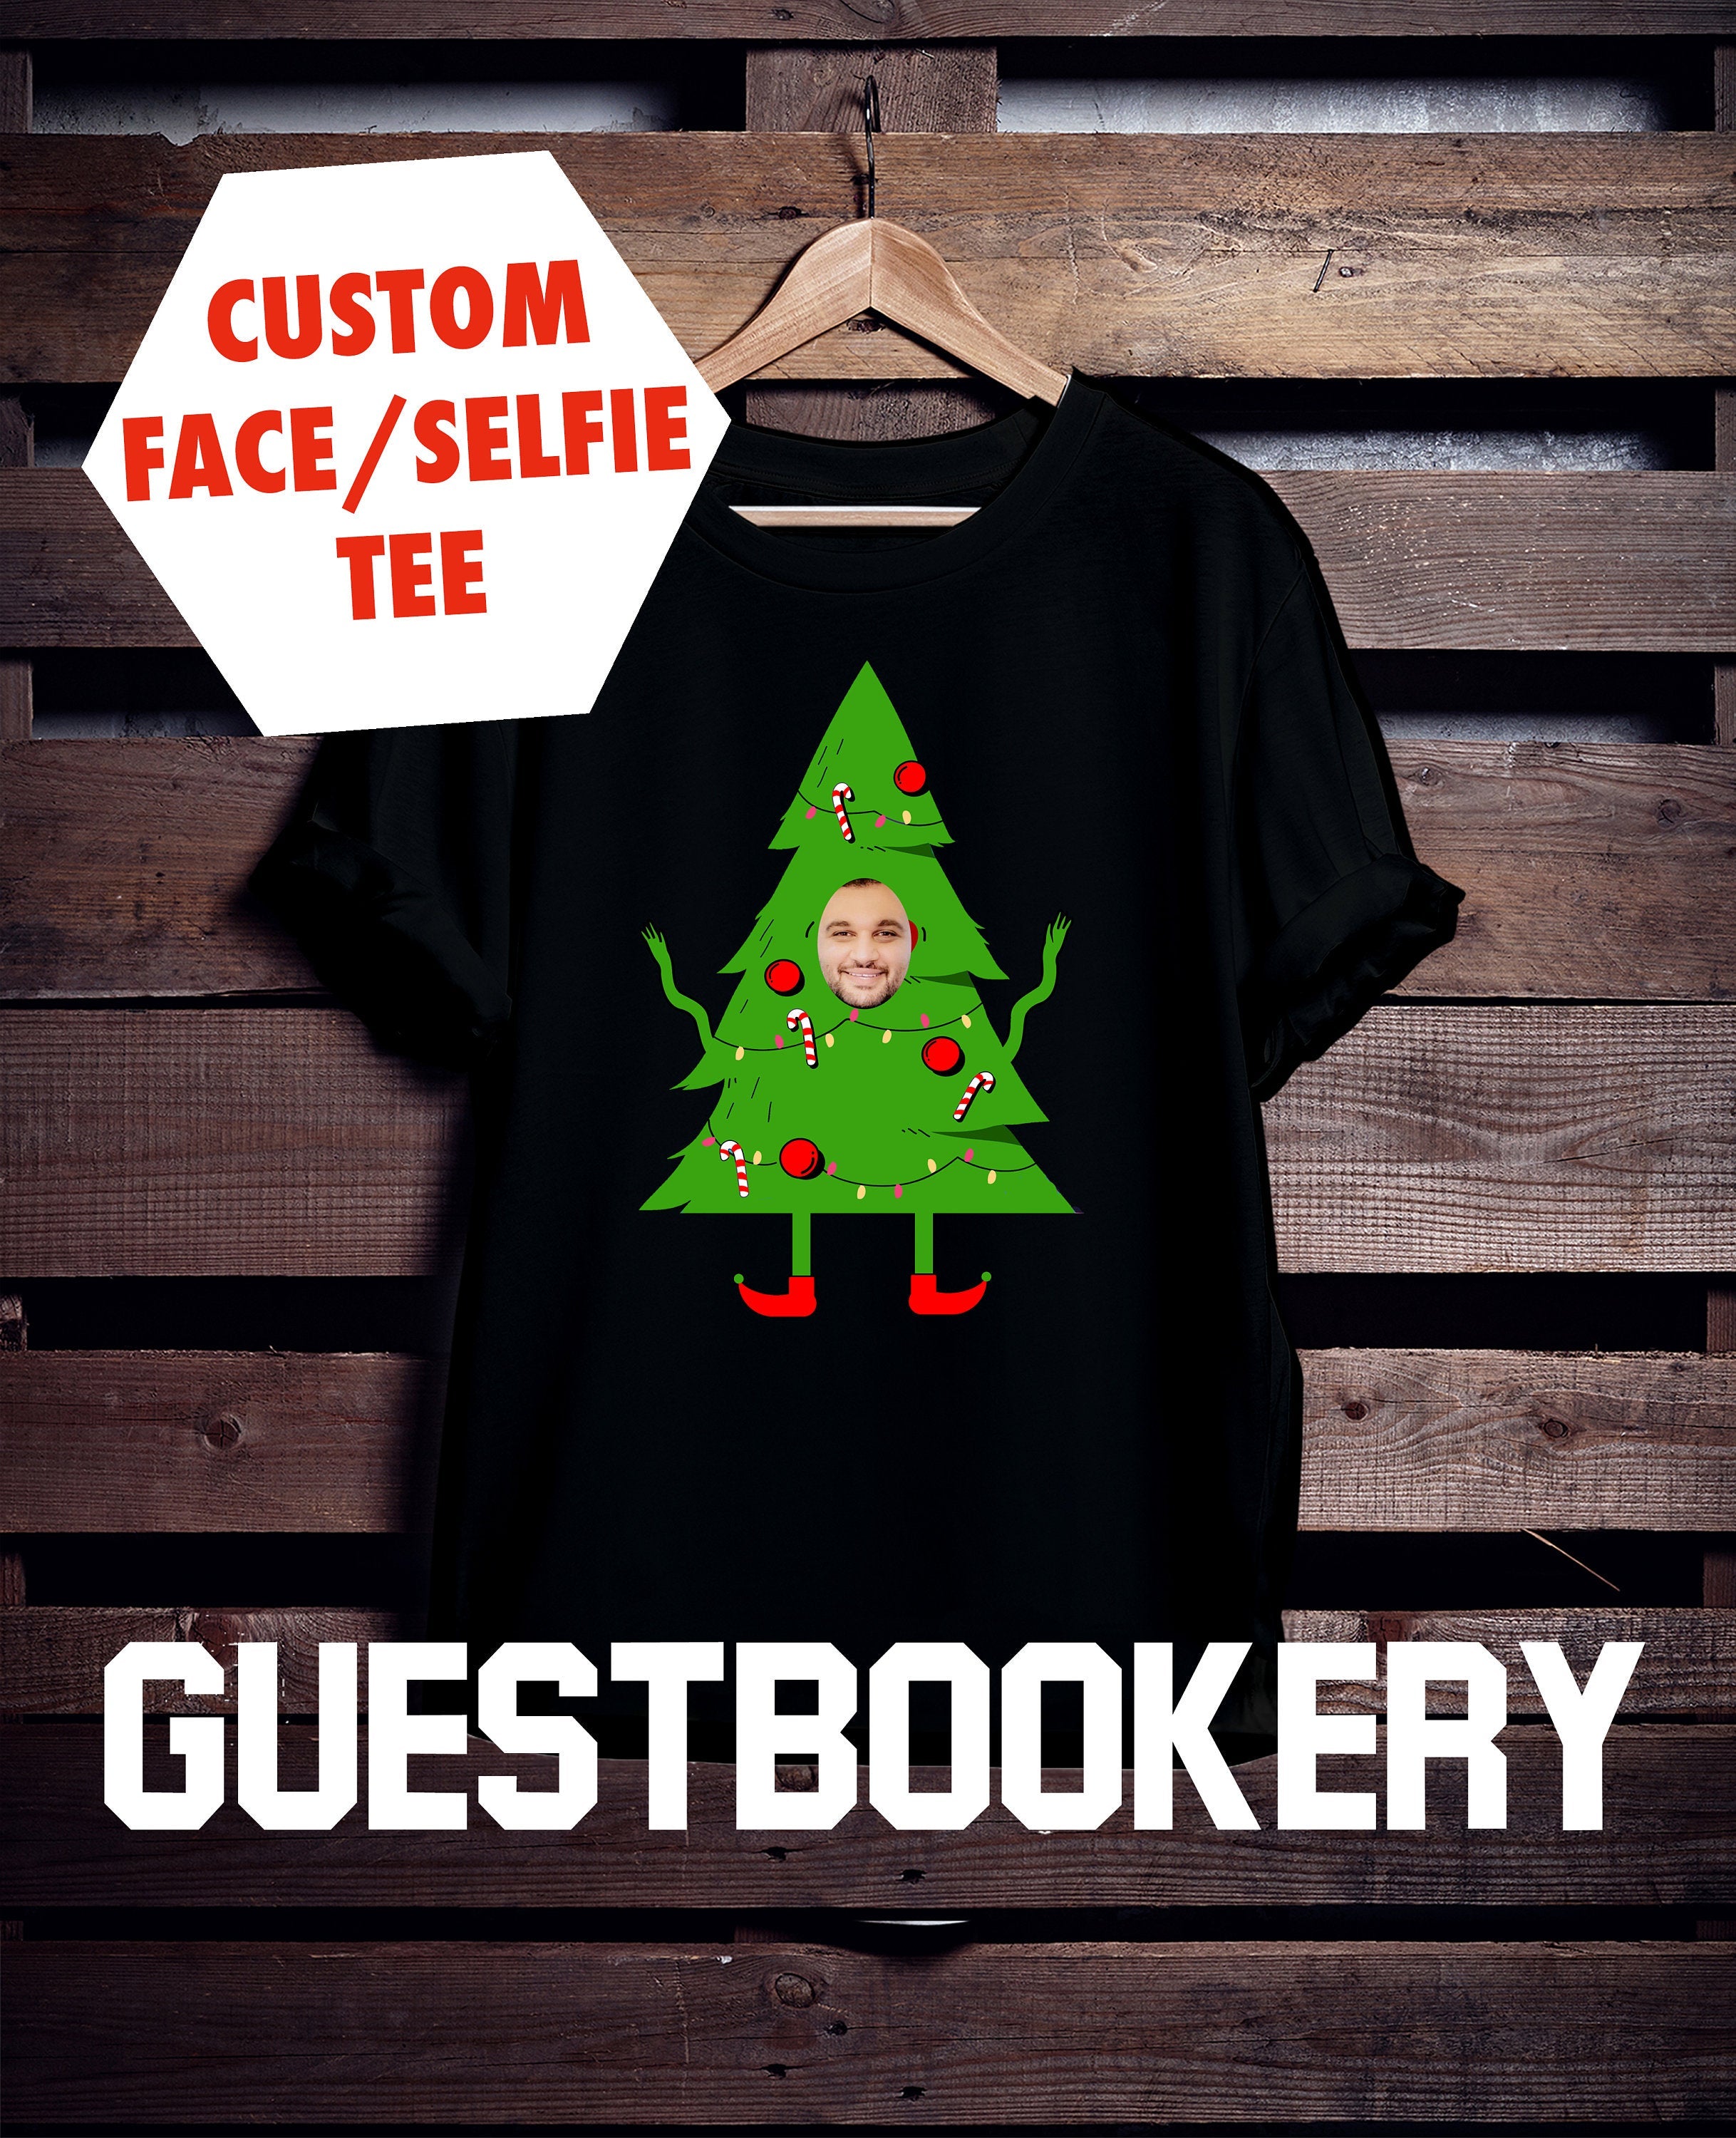 Custom Face Ugly Christmas Tree T-shirt - Guestbookery